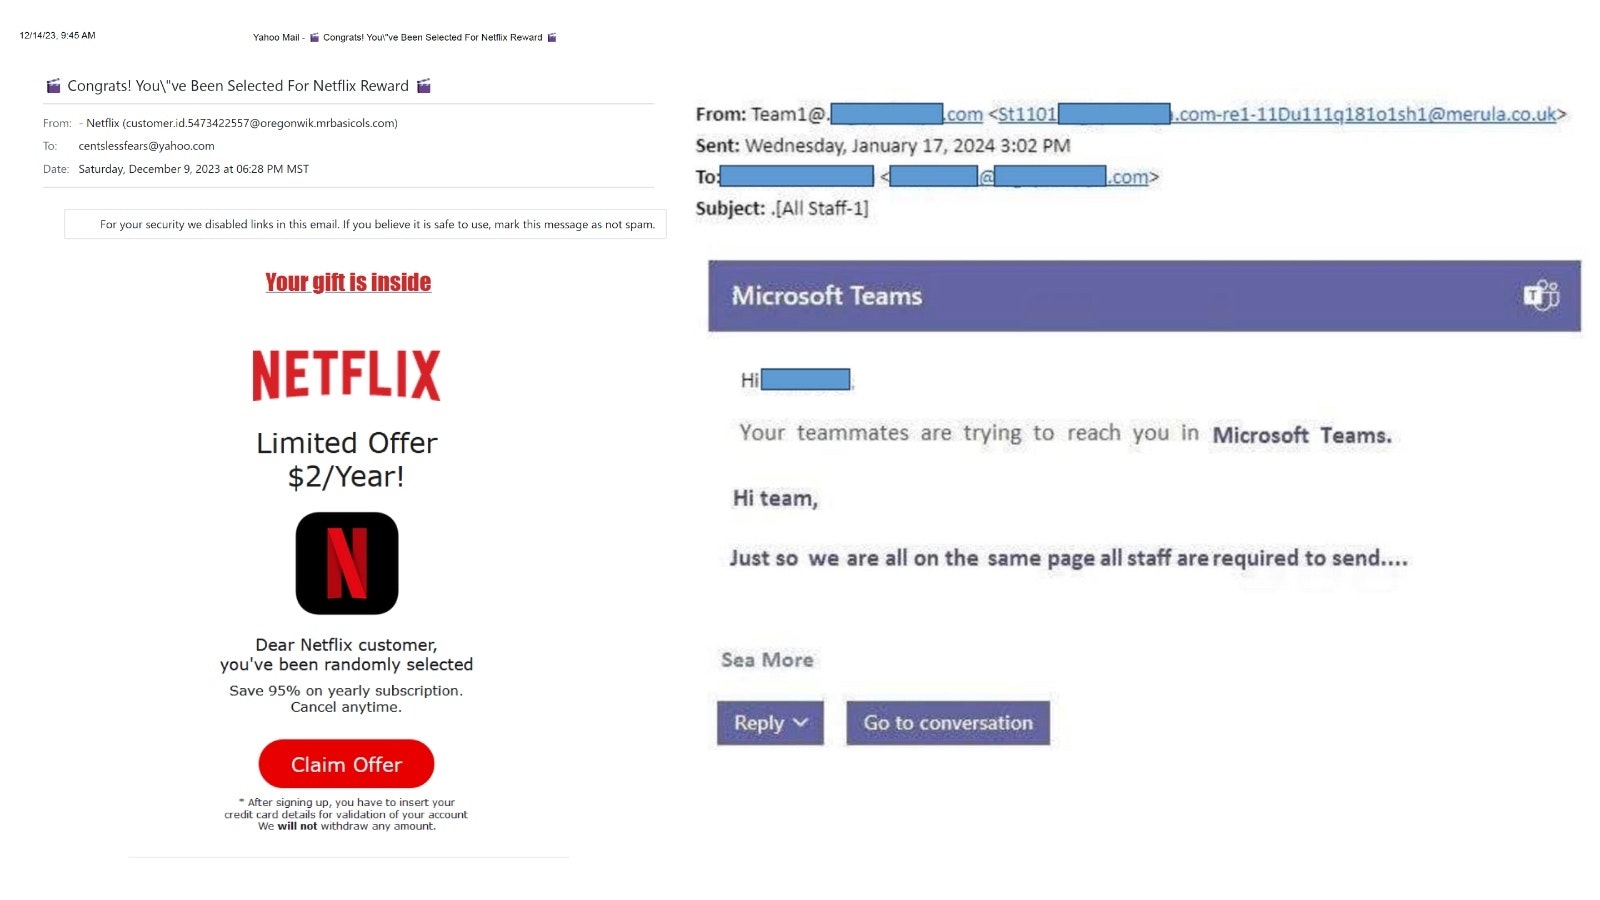 Examples of a couple of popular email scams. At left, offers from Netflix and other like businesses that offer what seems to be a great ideal, but instead gives hackers access to your personal information. At right is the Microsoft Teams scam, which confuses people to think it's a legitimate work-related email.